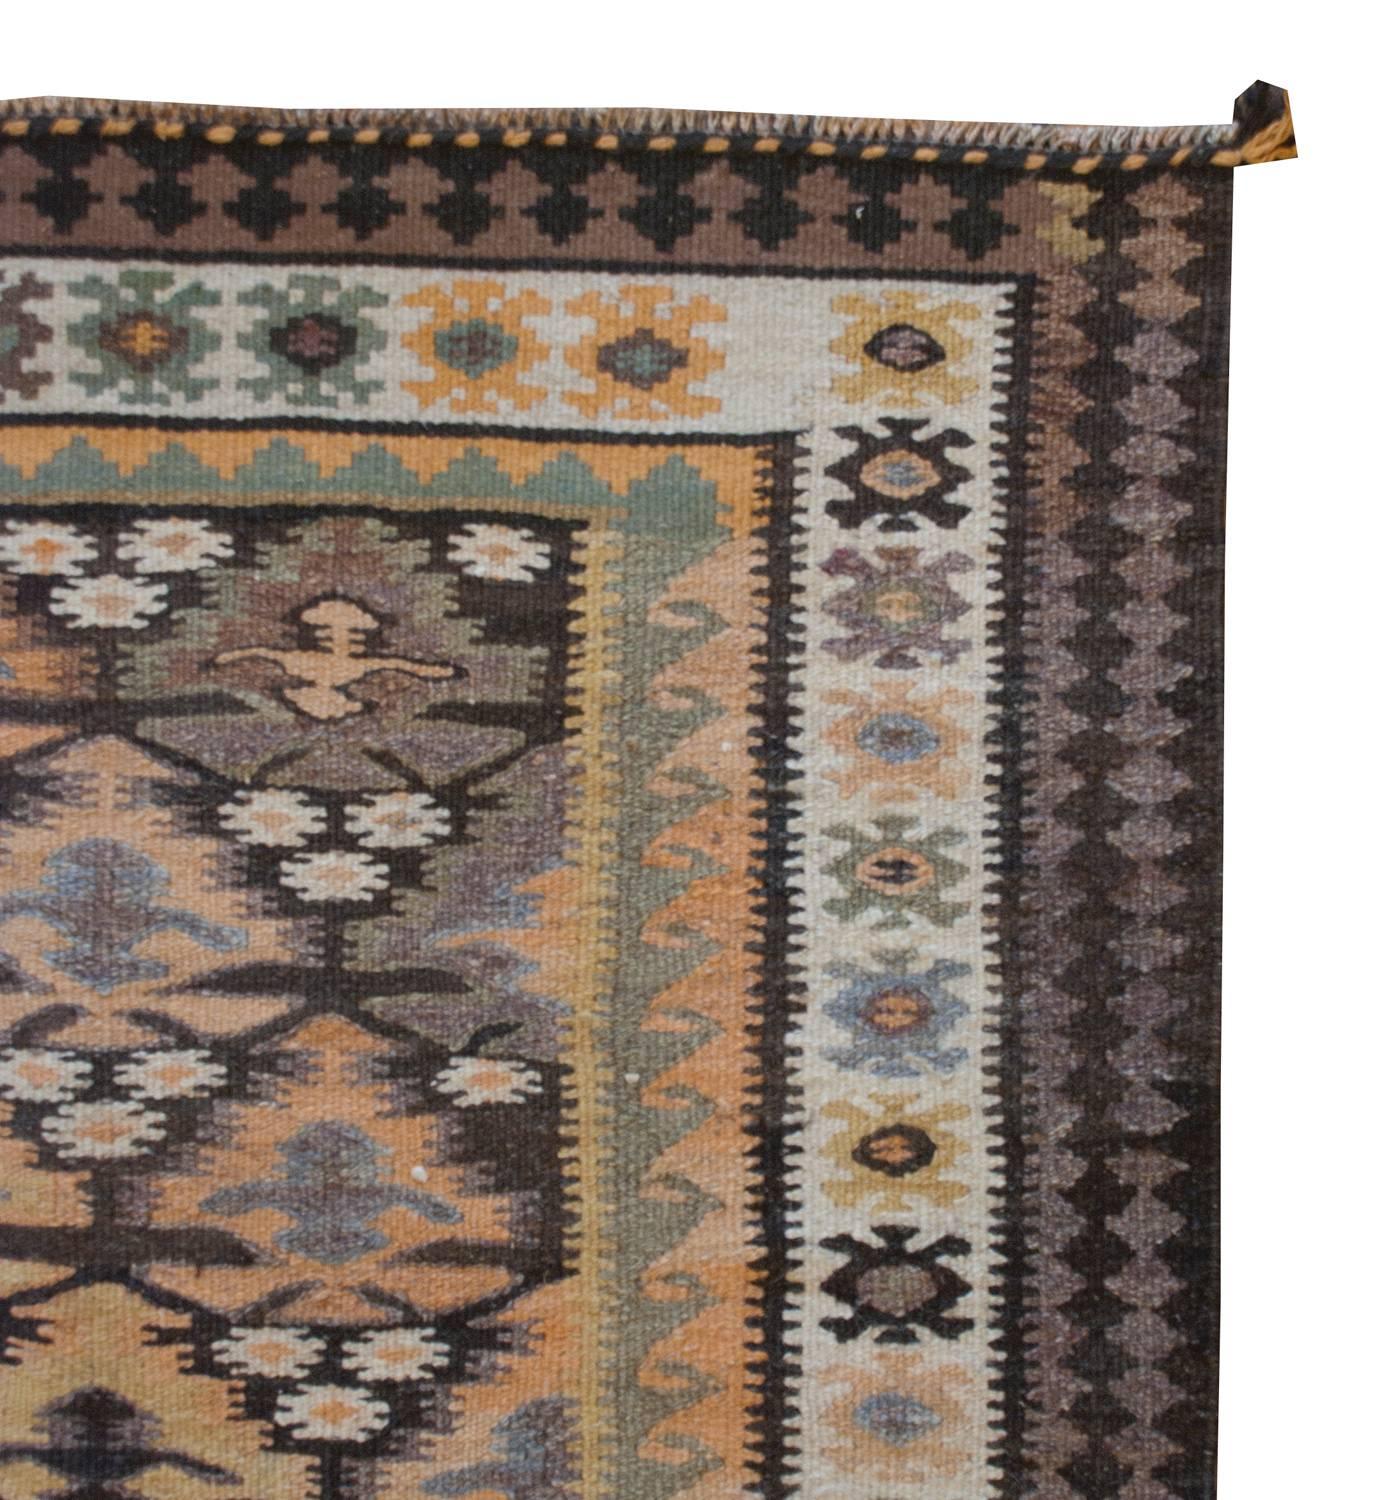 Vegetable Dyed Beautiful Early 20th Century Qazvin Kilim